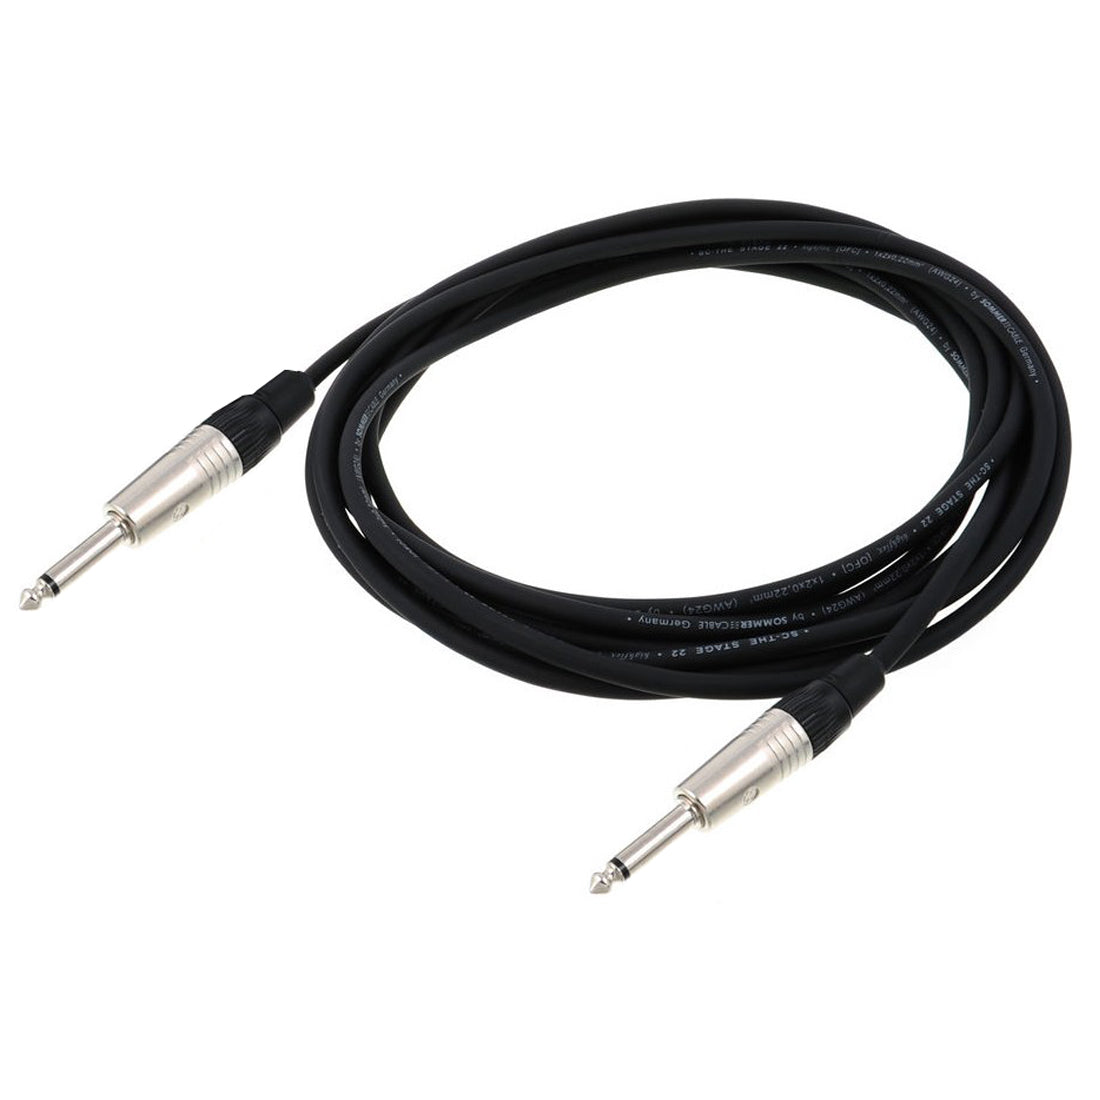 ZZIPP audio cable for musical instruments, straight 6.35 mm Jack cable, 9 meter low noise audio cable